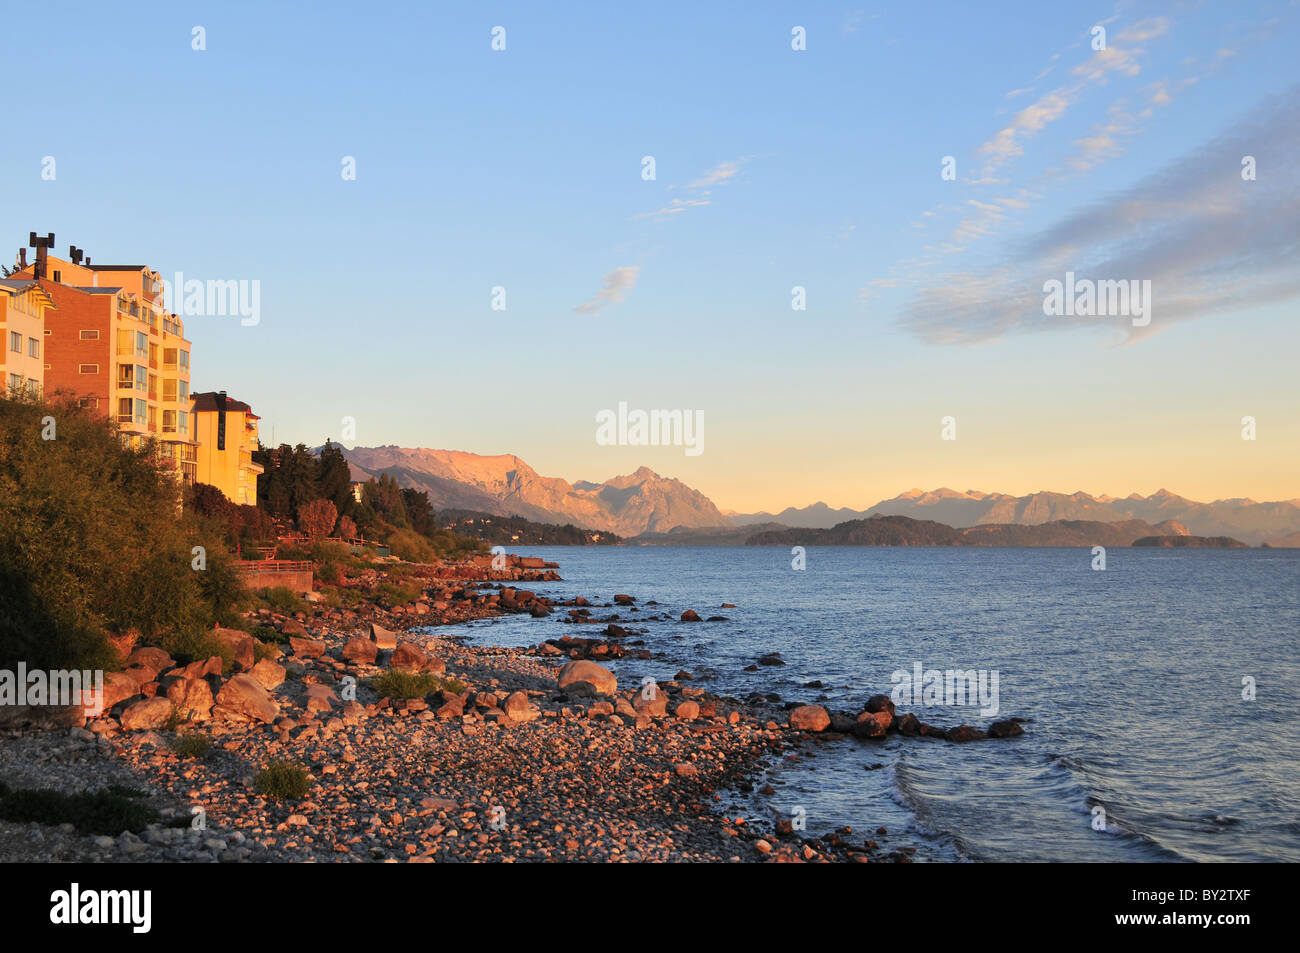 Stony beach view of morning waters of Lake Nahuel Huapi towards red sun glow Cerro Lopez and Andean peaks, Bariloche, Argentina Stock Photo